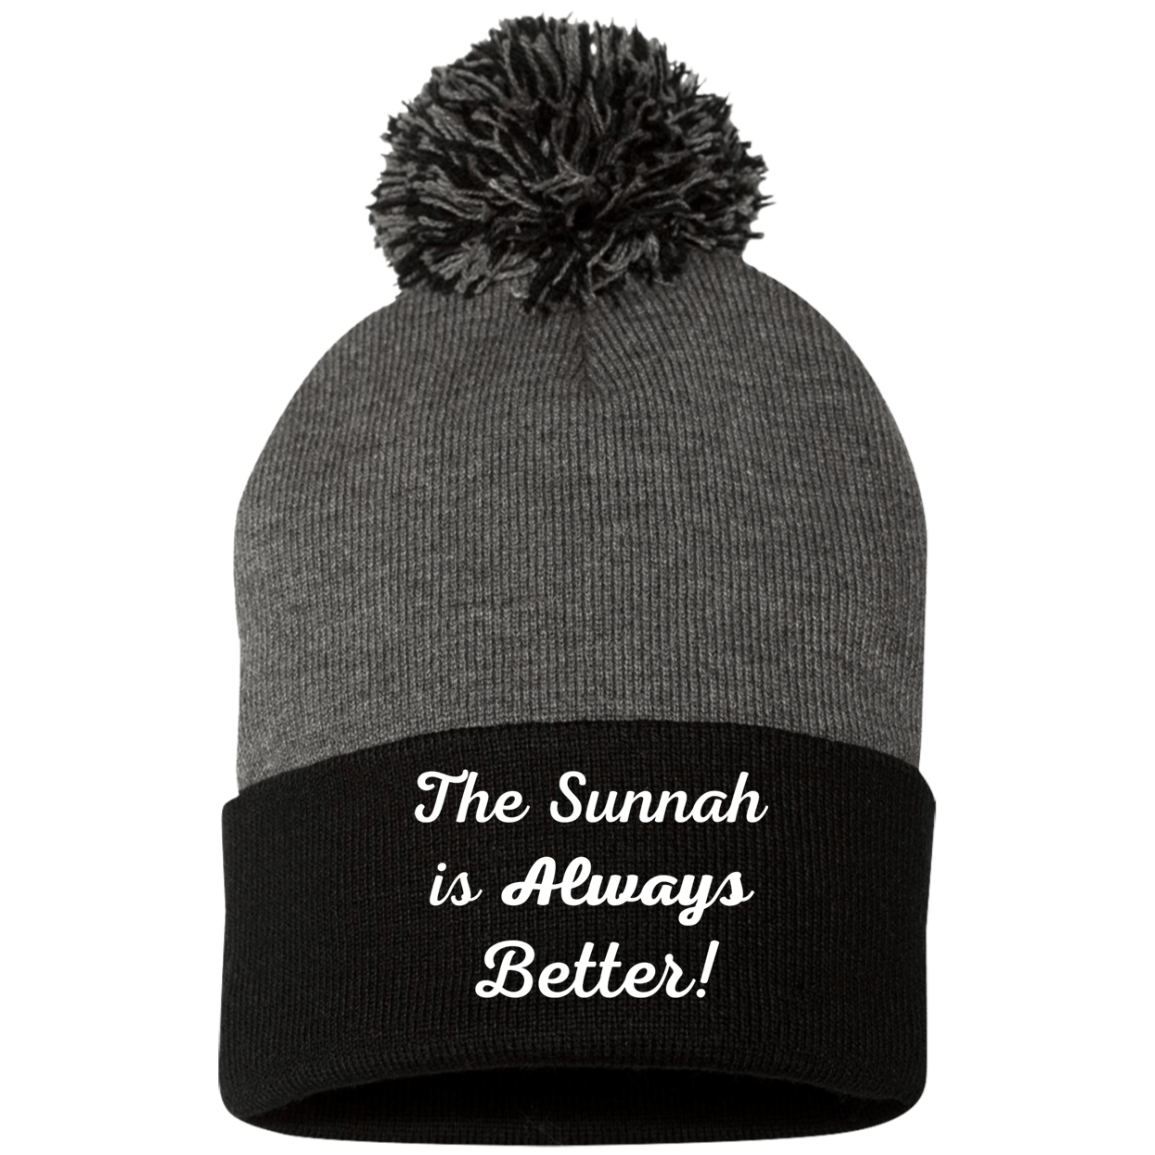 THE SUNNAH IS ALWAYS BETTER! Embroidered Pom Pom Knit Cap (MORE COLOR OPTIONS)